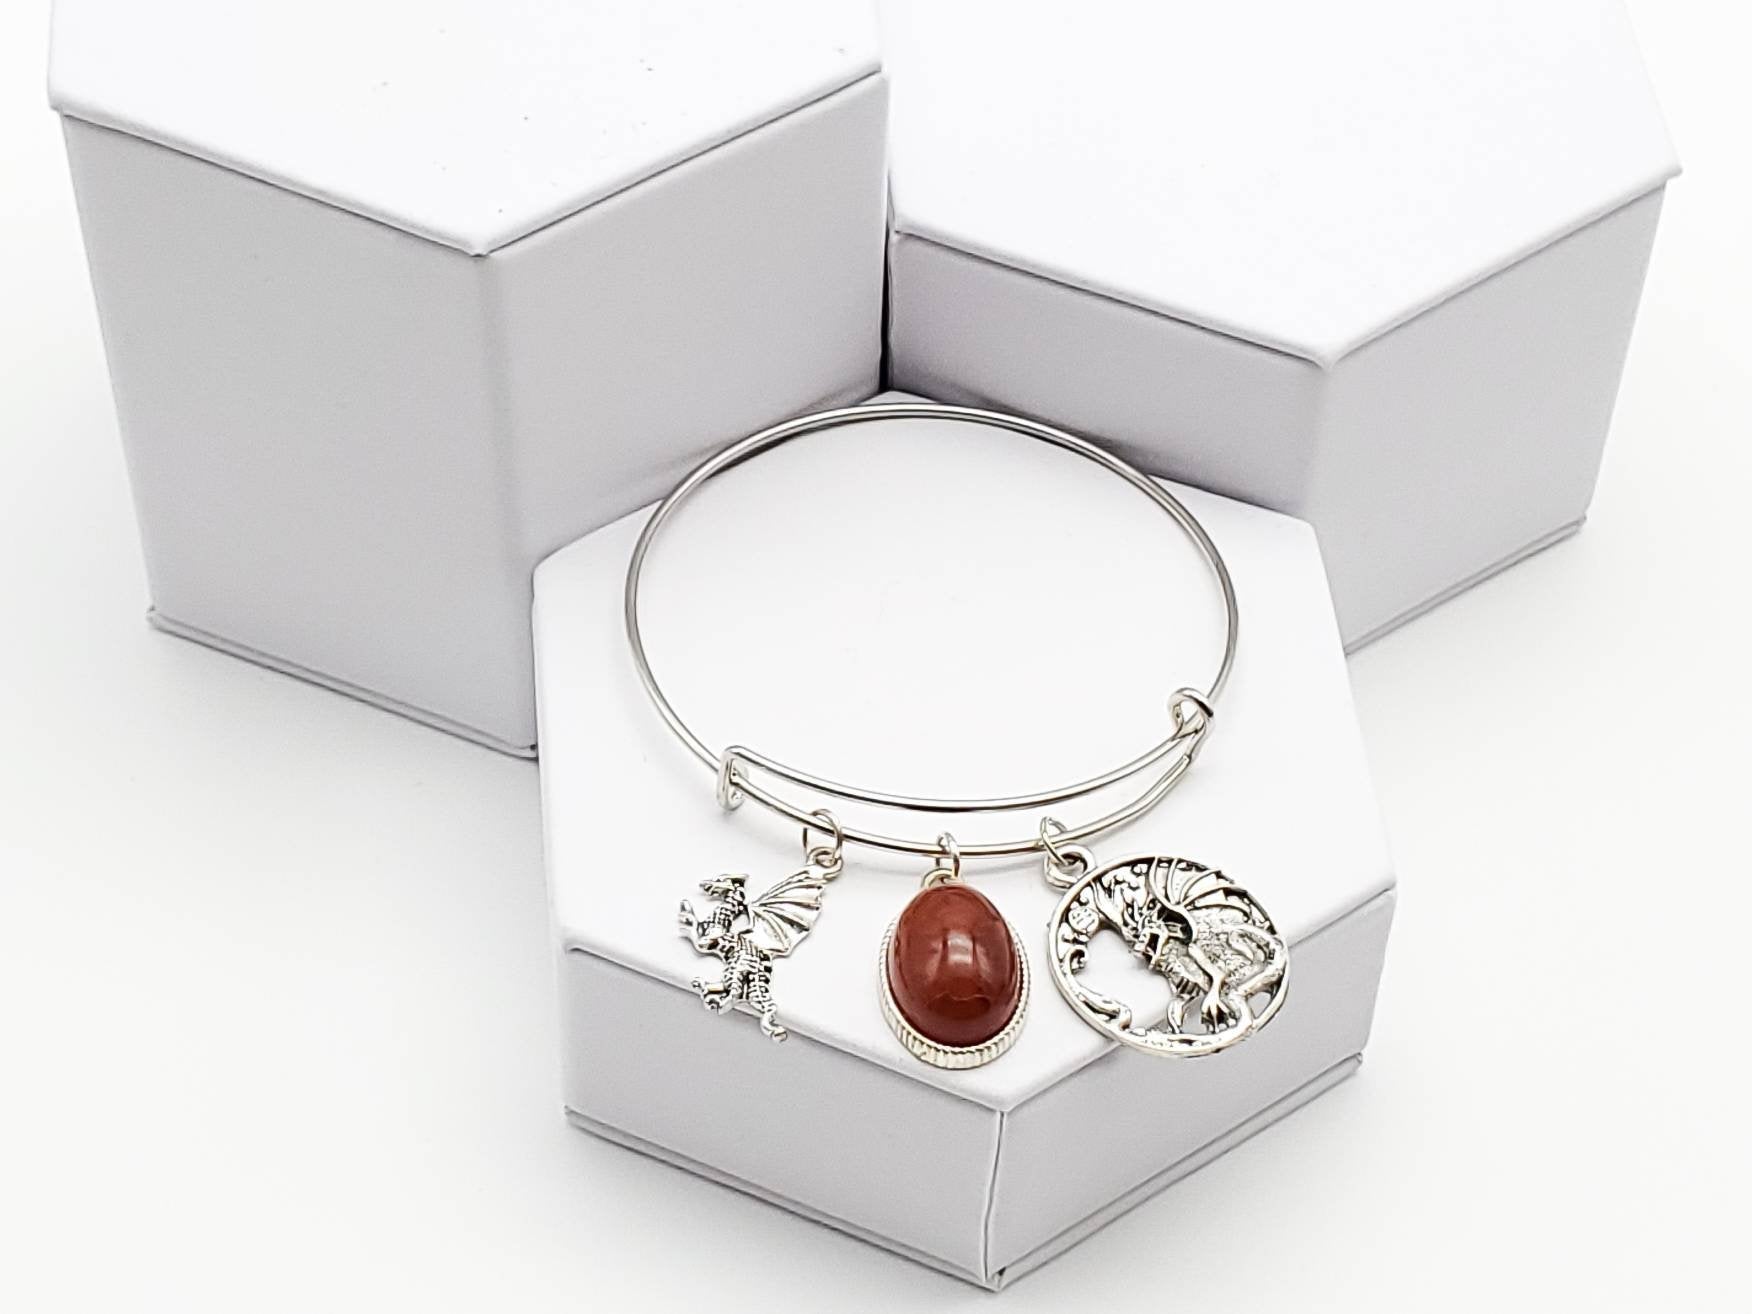 Charm Bangle with Dragon Charms and Red Dragon Vein Agate - The Caffeinated Raven